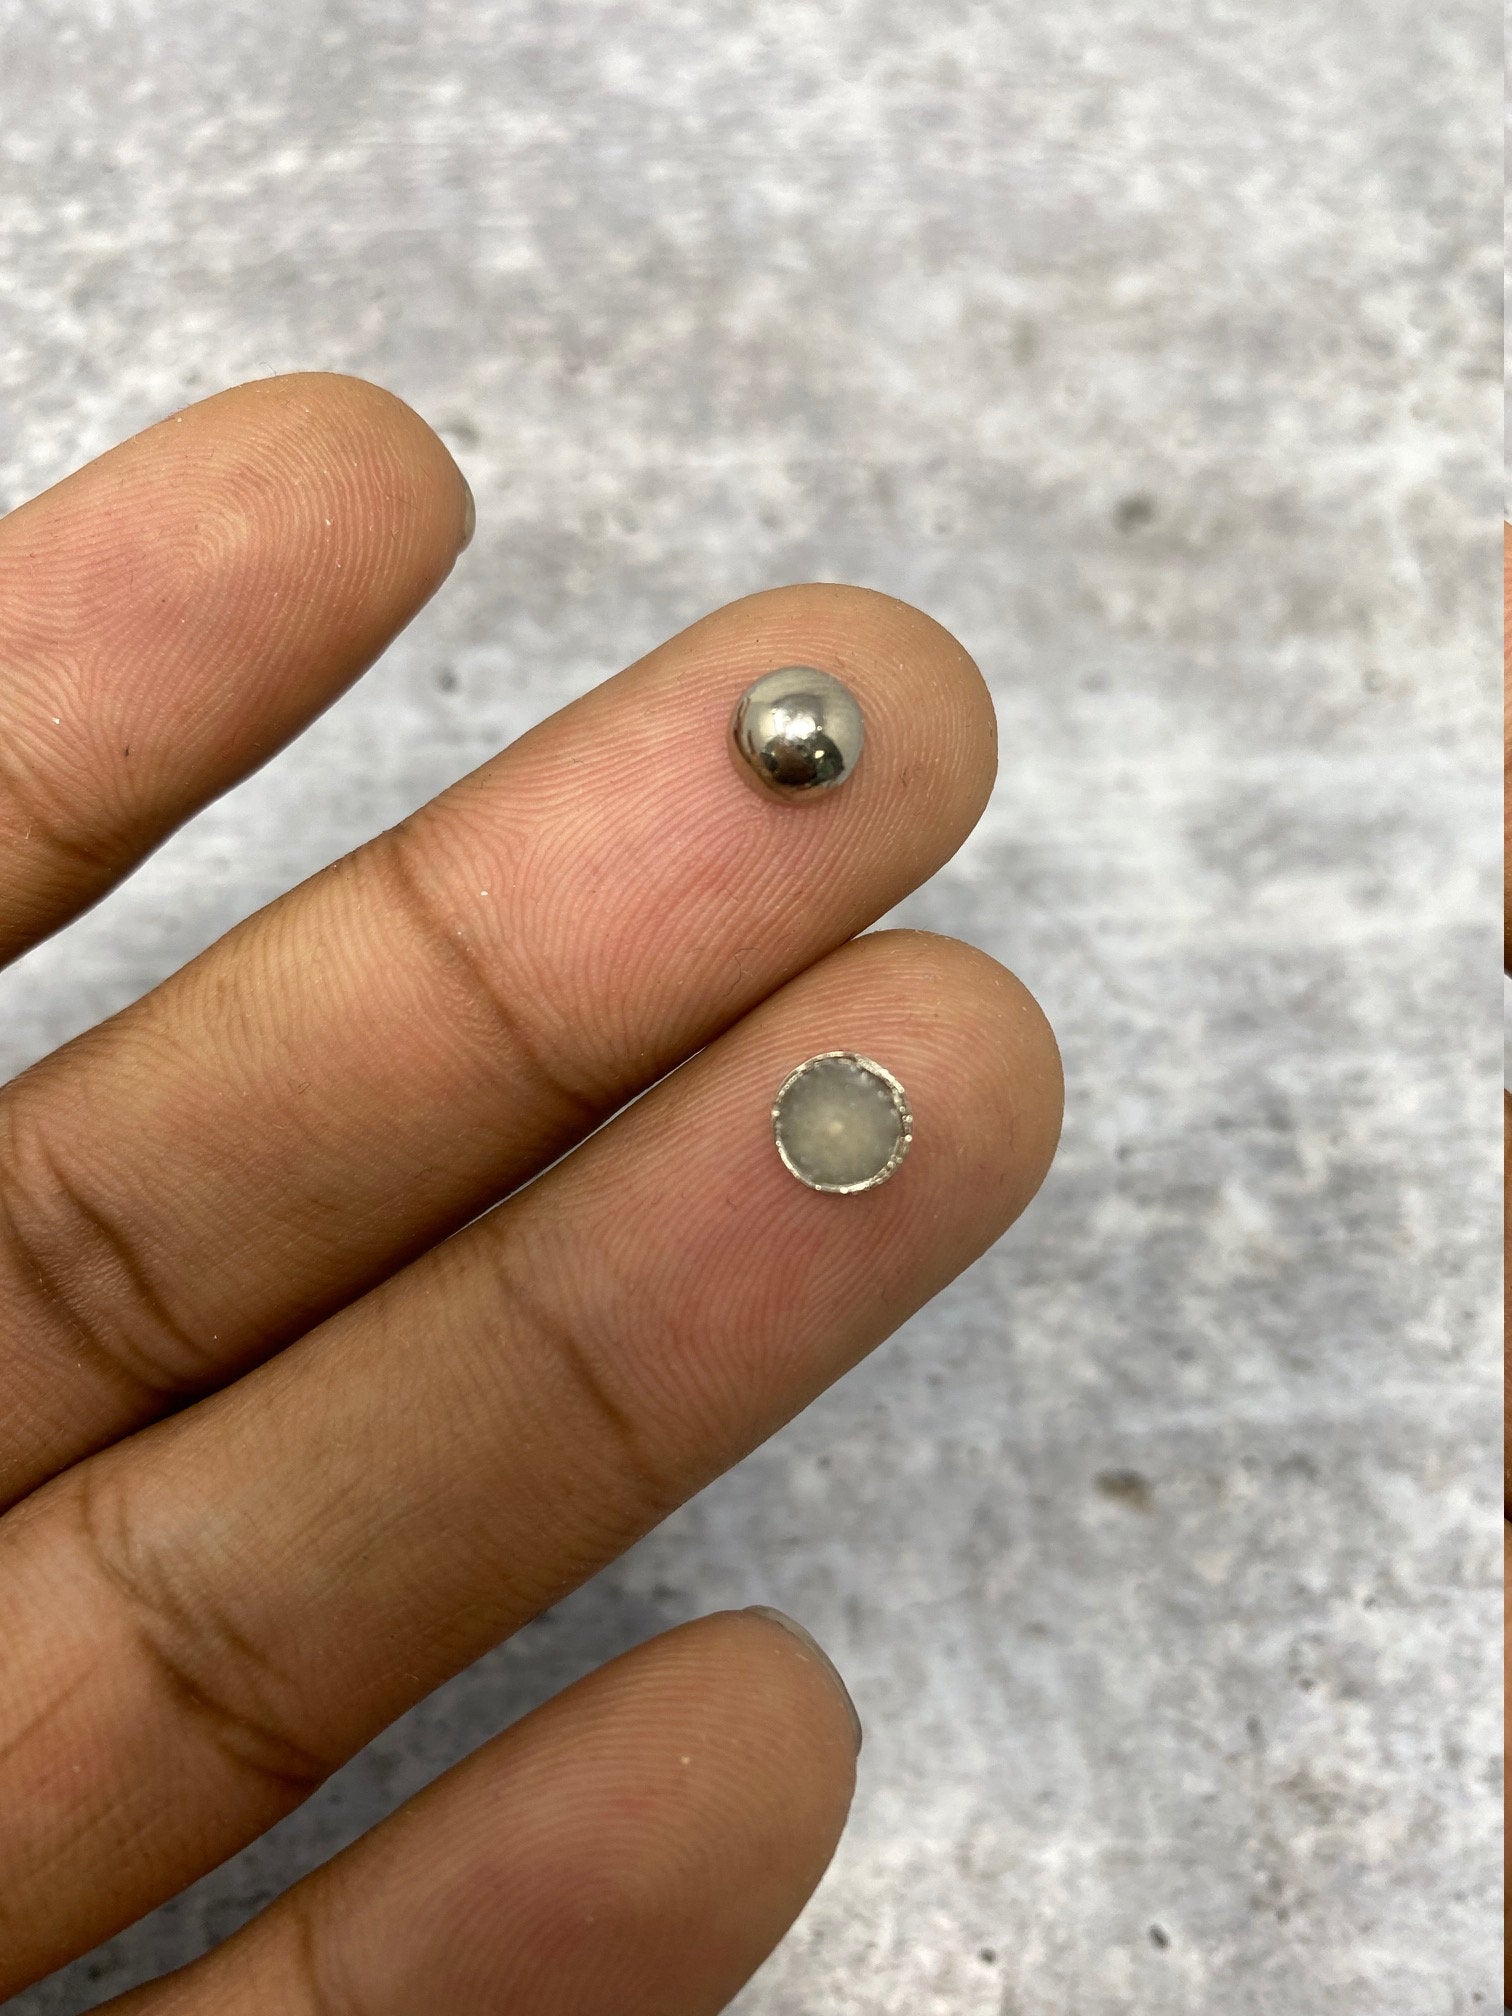 NEW, Hotfix Dome Studs, 100 Pcs, 7mm (Medium) SILVER, Great for Denim, Sweaters, Camo Jackets, Belts, Bags, Shoes, Crafts,+ MORE!